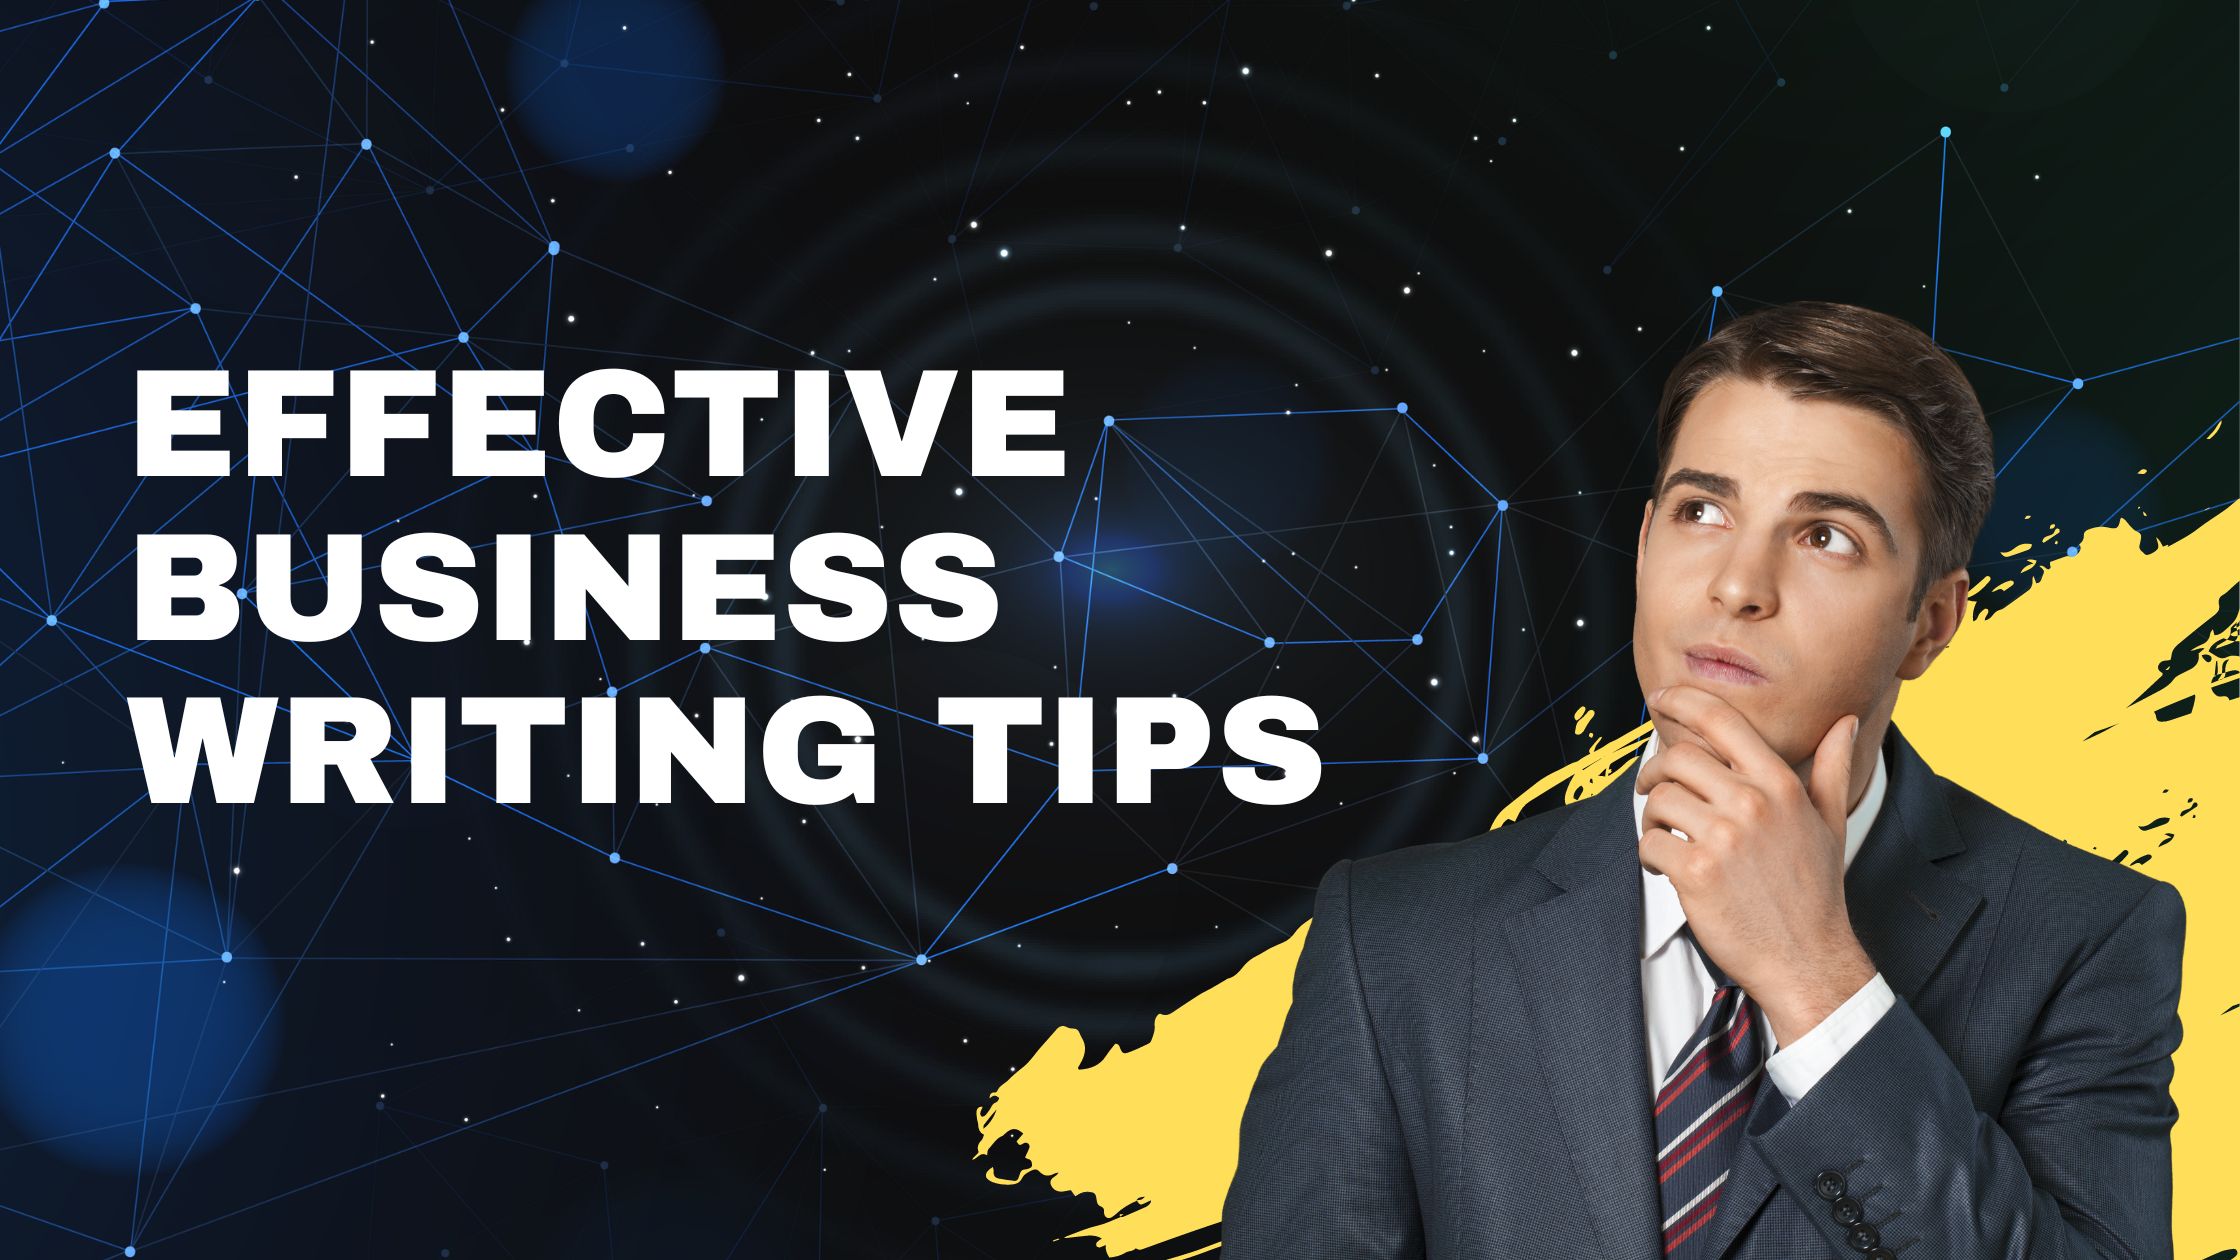 Effective business writing tips